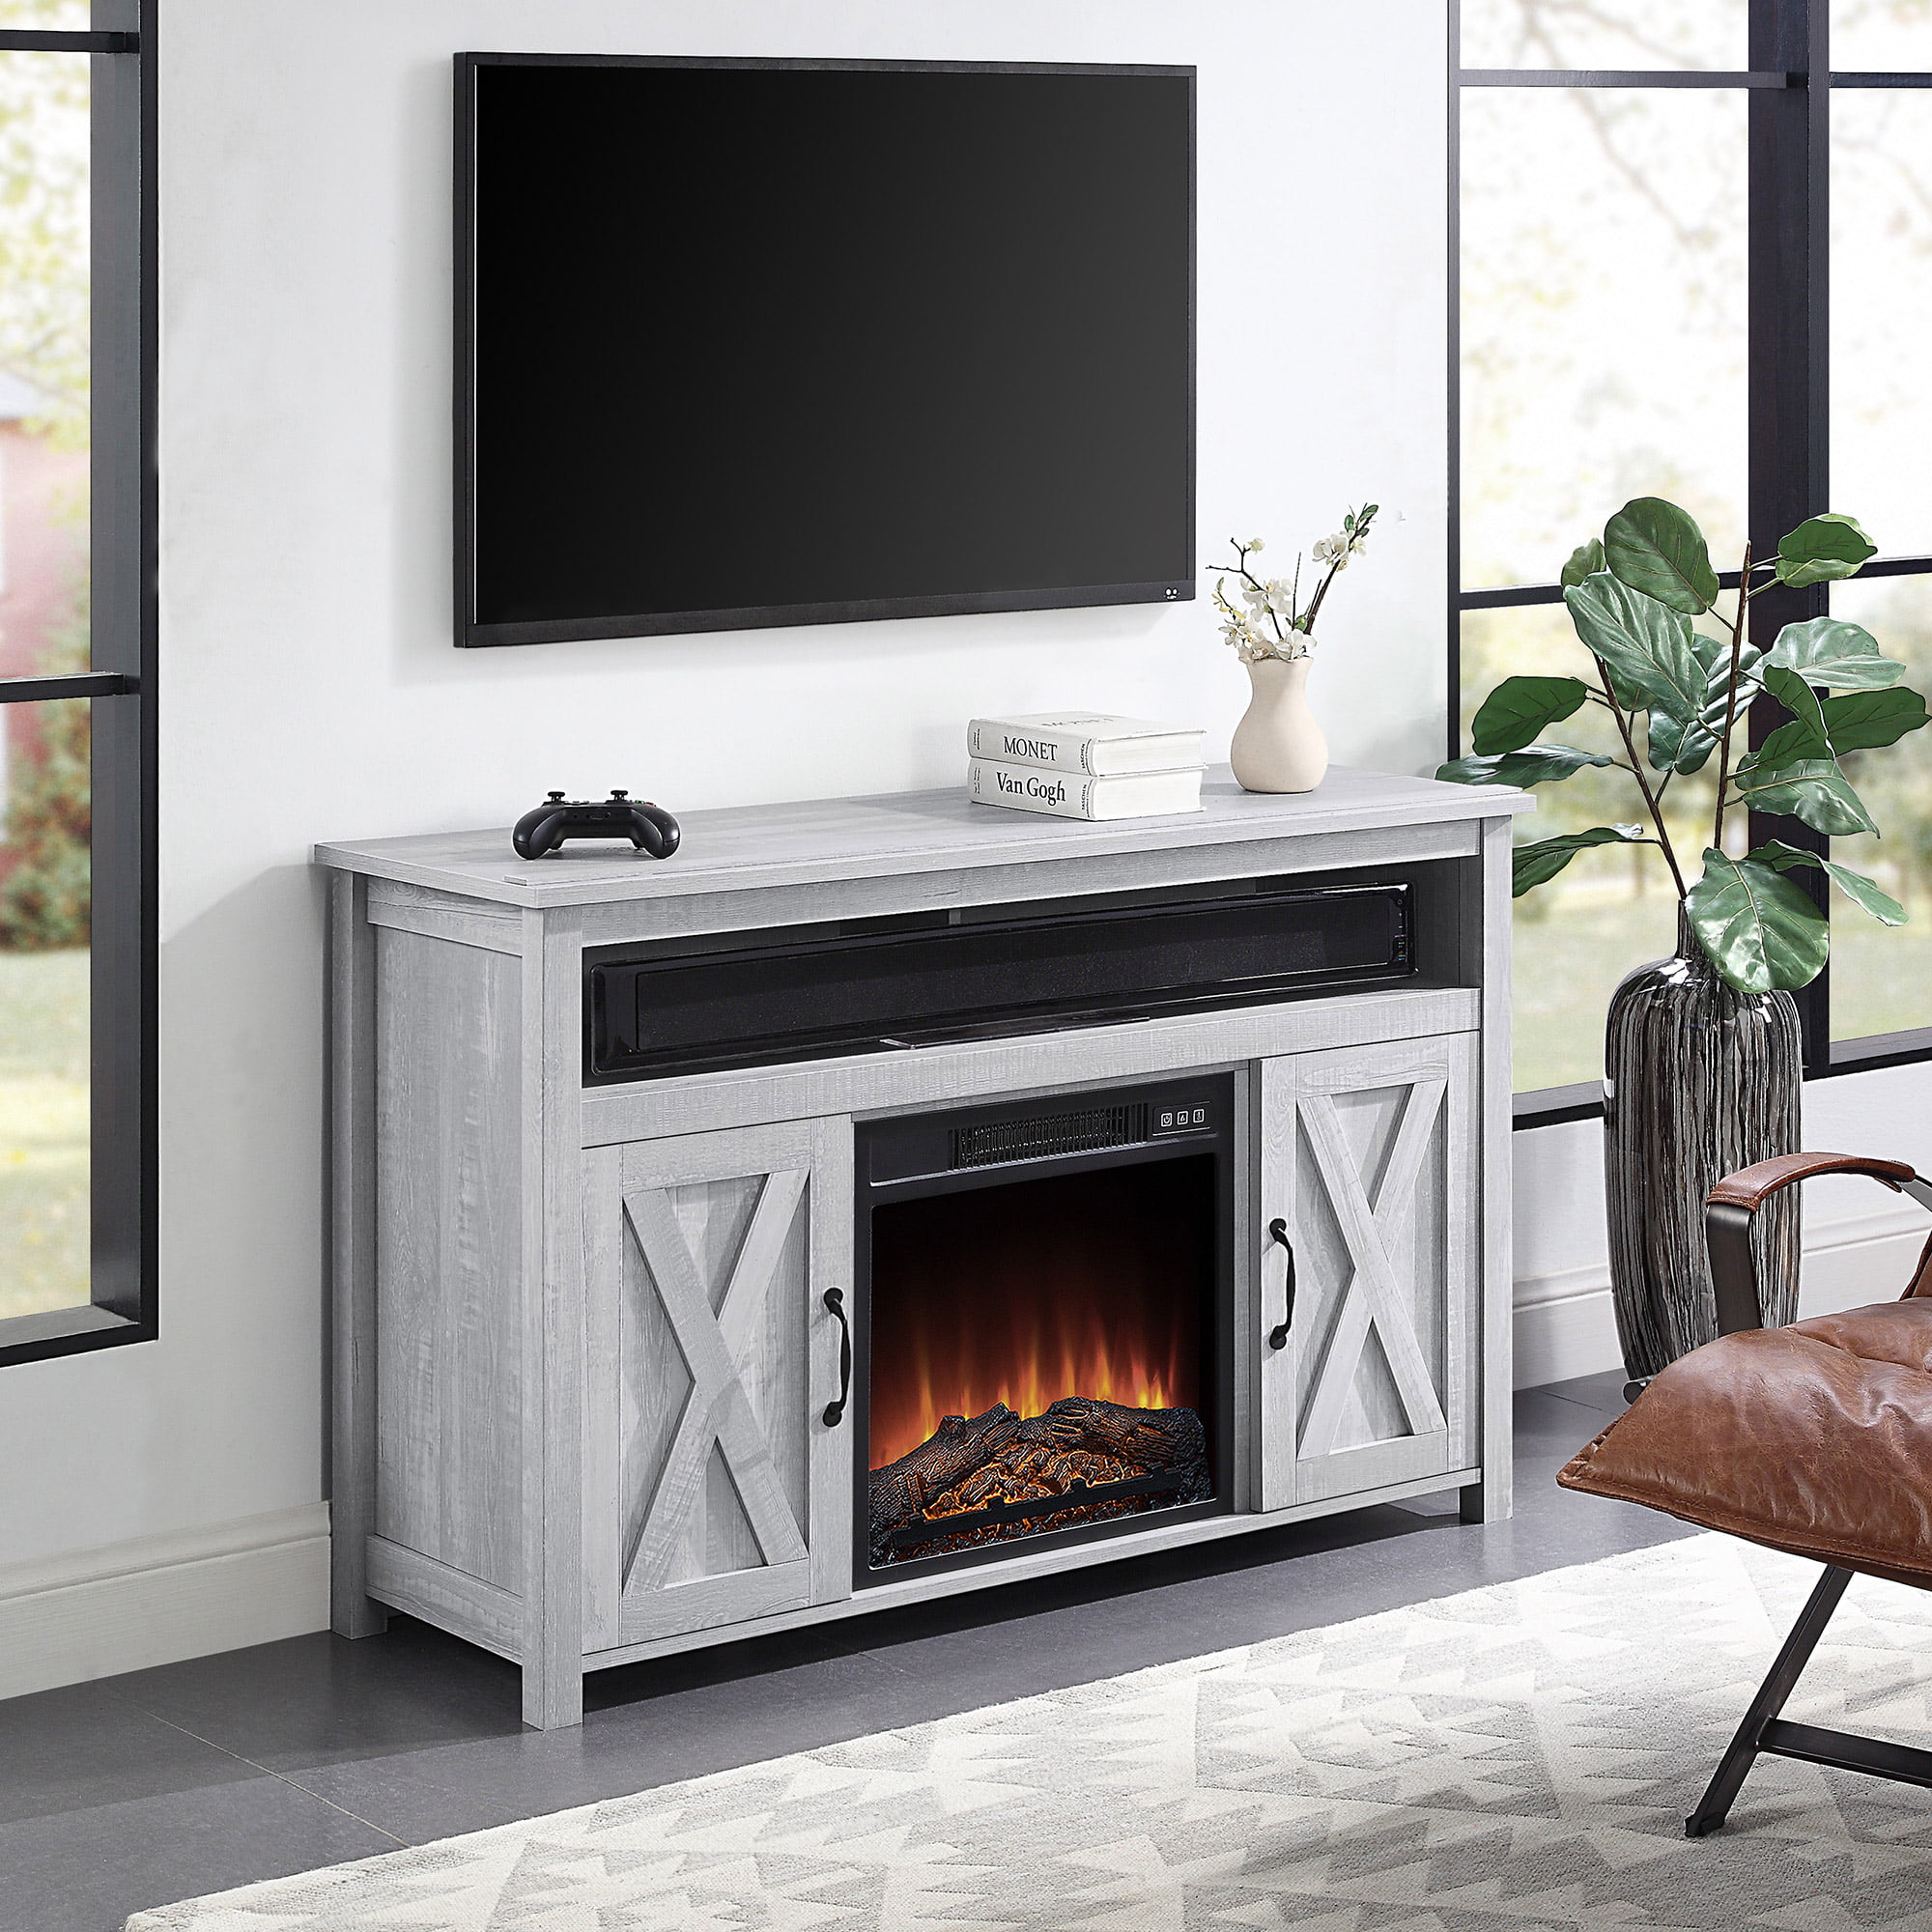 BELLEZE TV Stand Console Electric Fireplace With Remote Control, 48" or